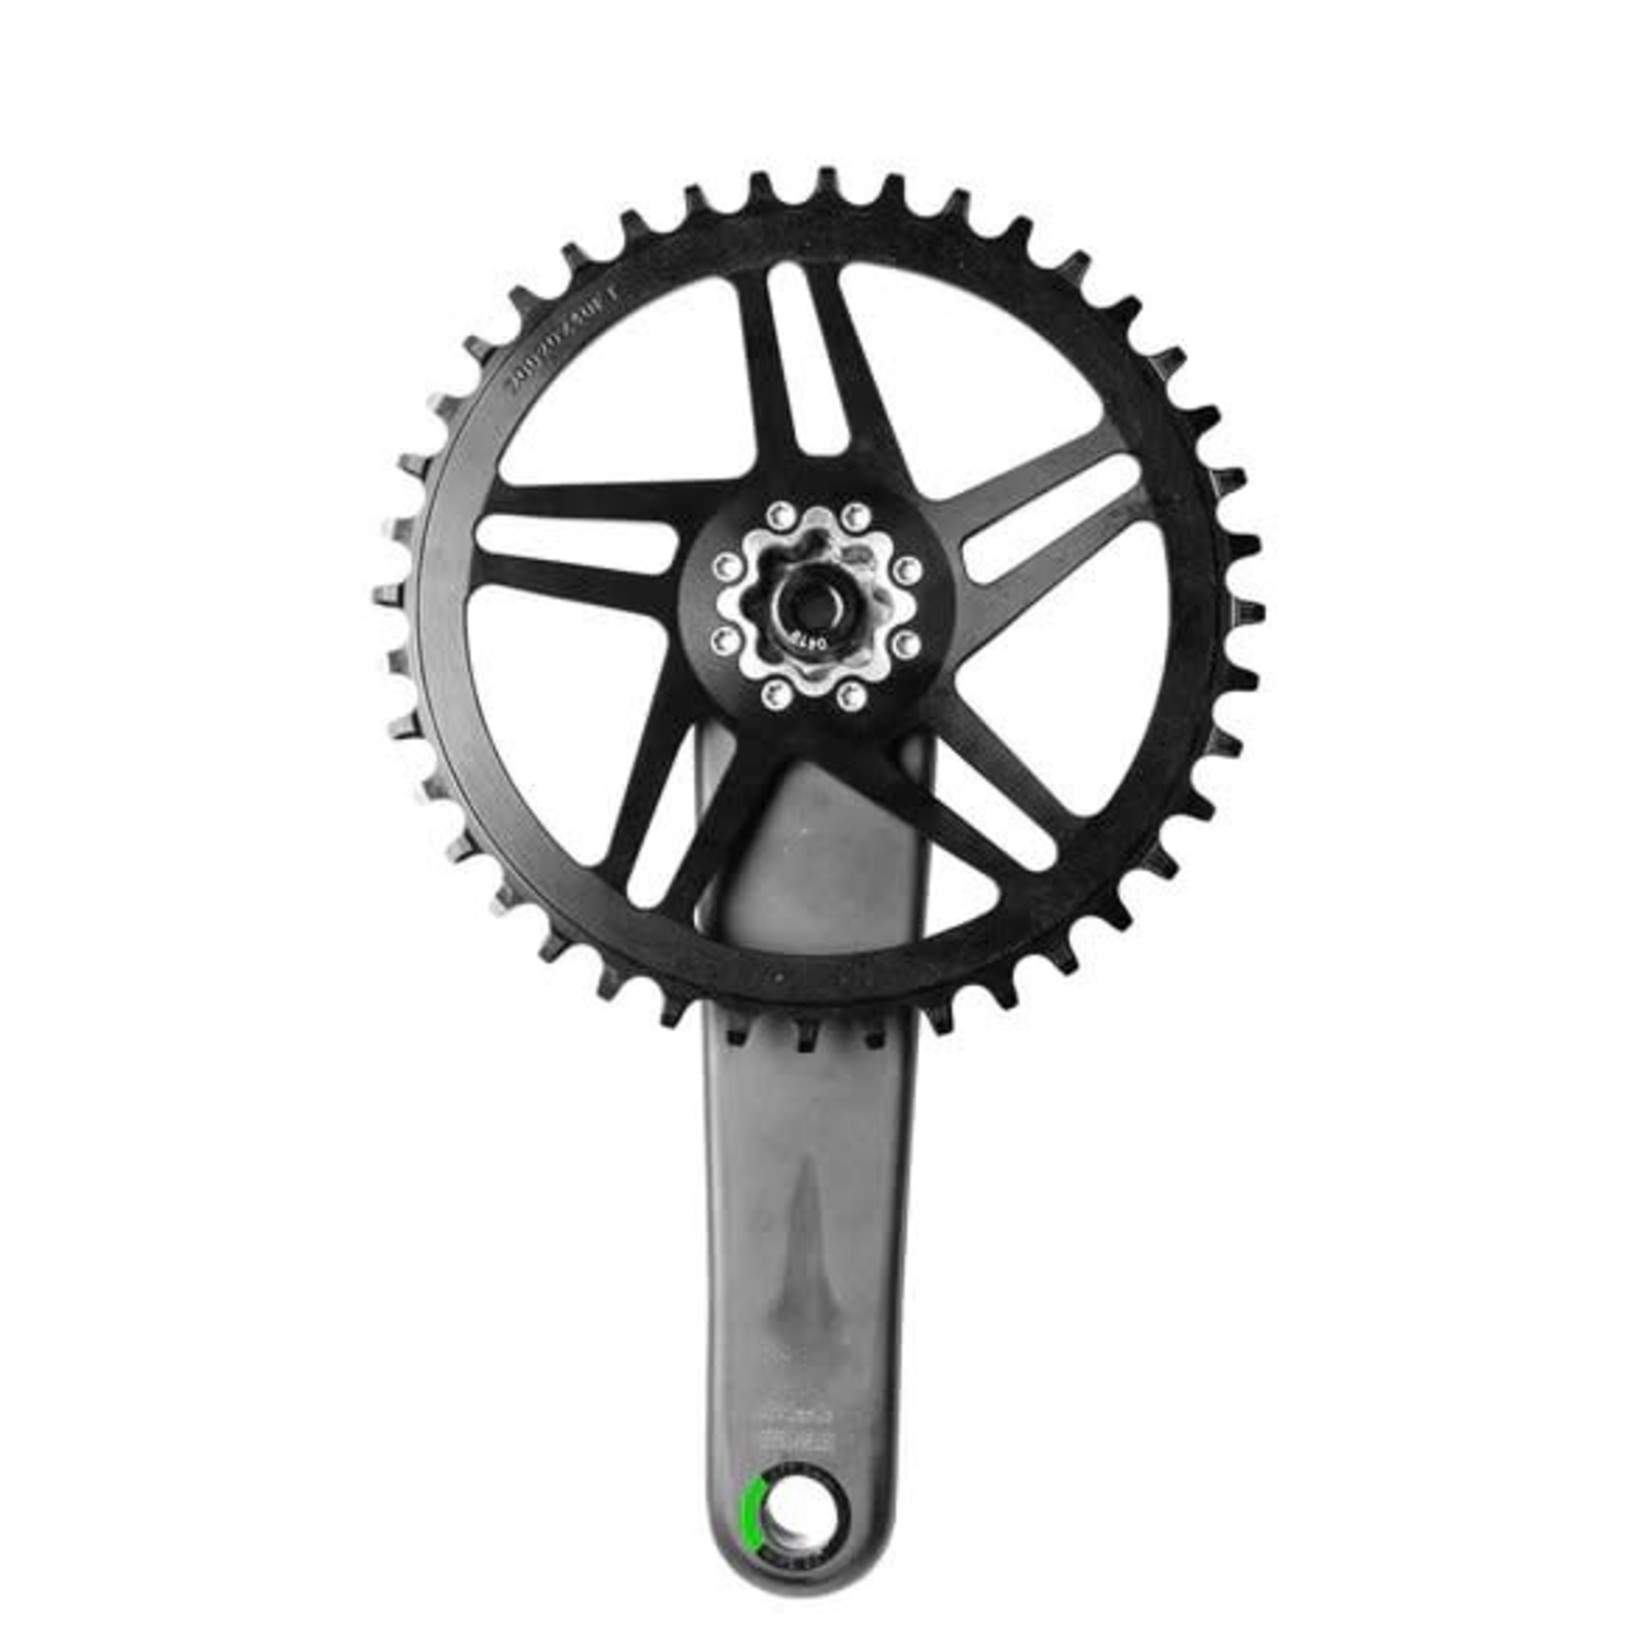 Wolf Tooth Direct Mount Chainring for SRAM 8-Bolt 42T